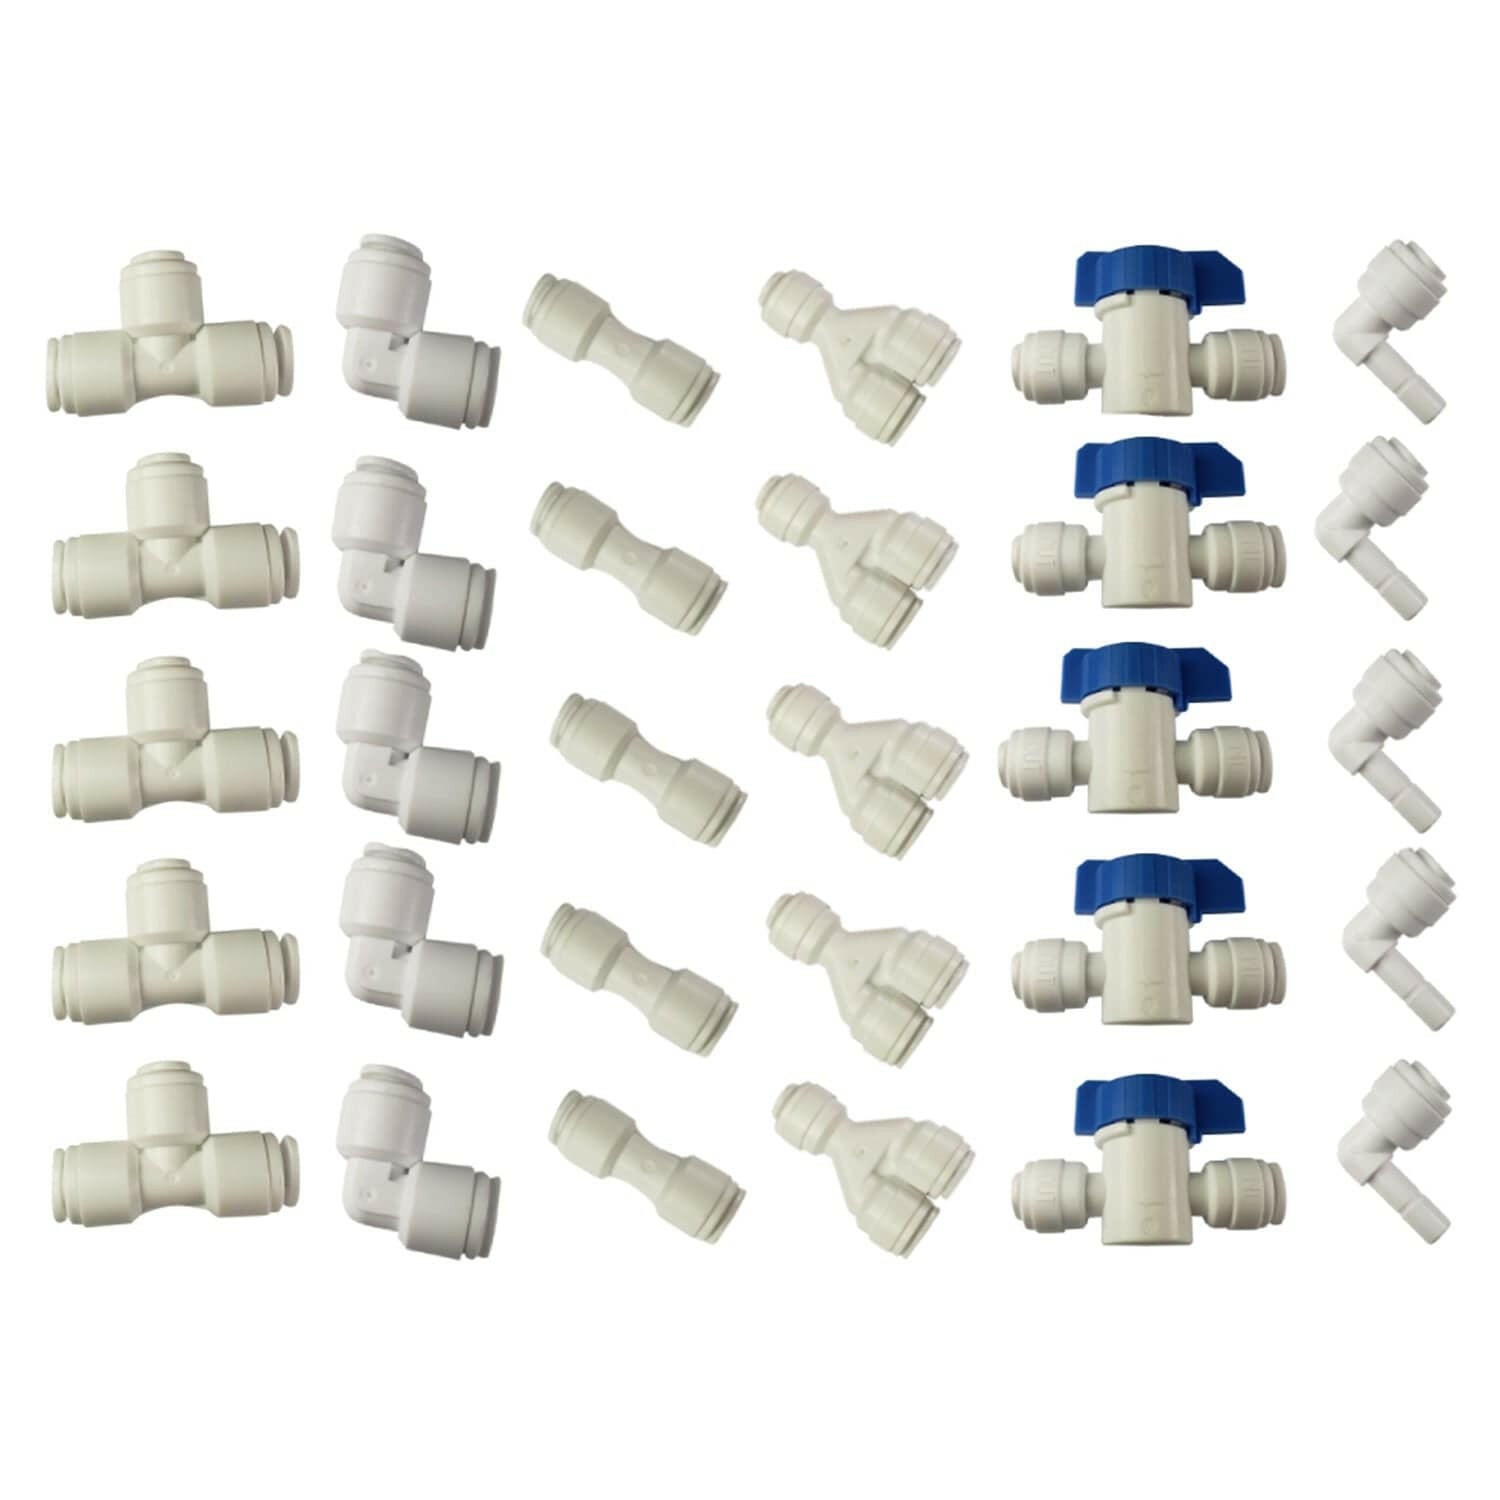 1/4" Quick Connect Reverse Osmosis Fittings Variety 30 Pack